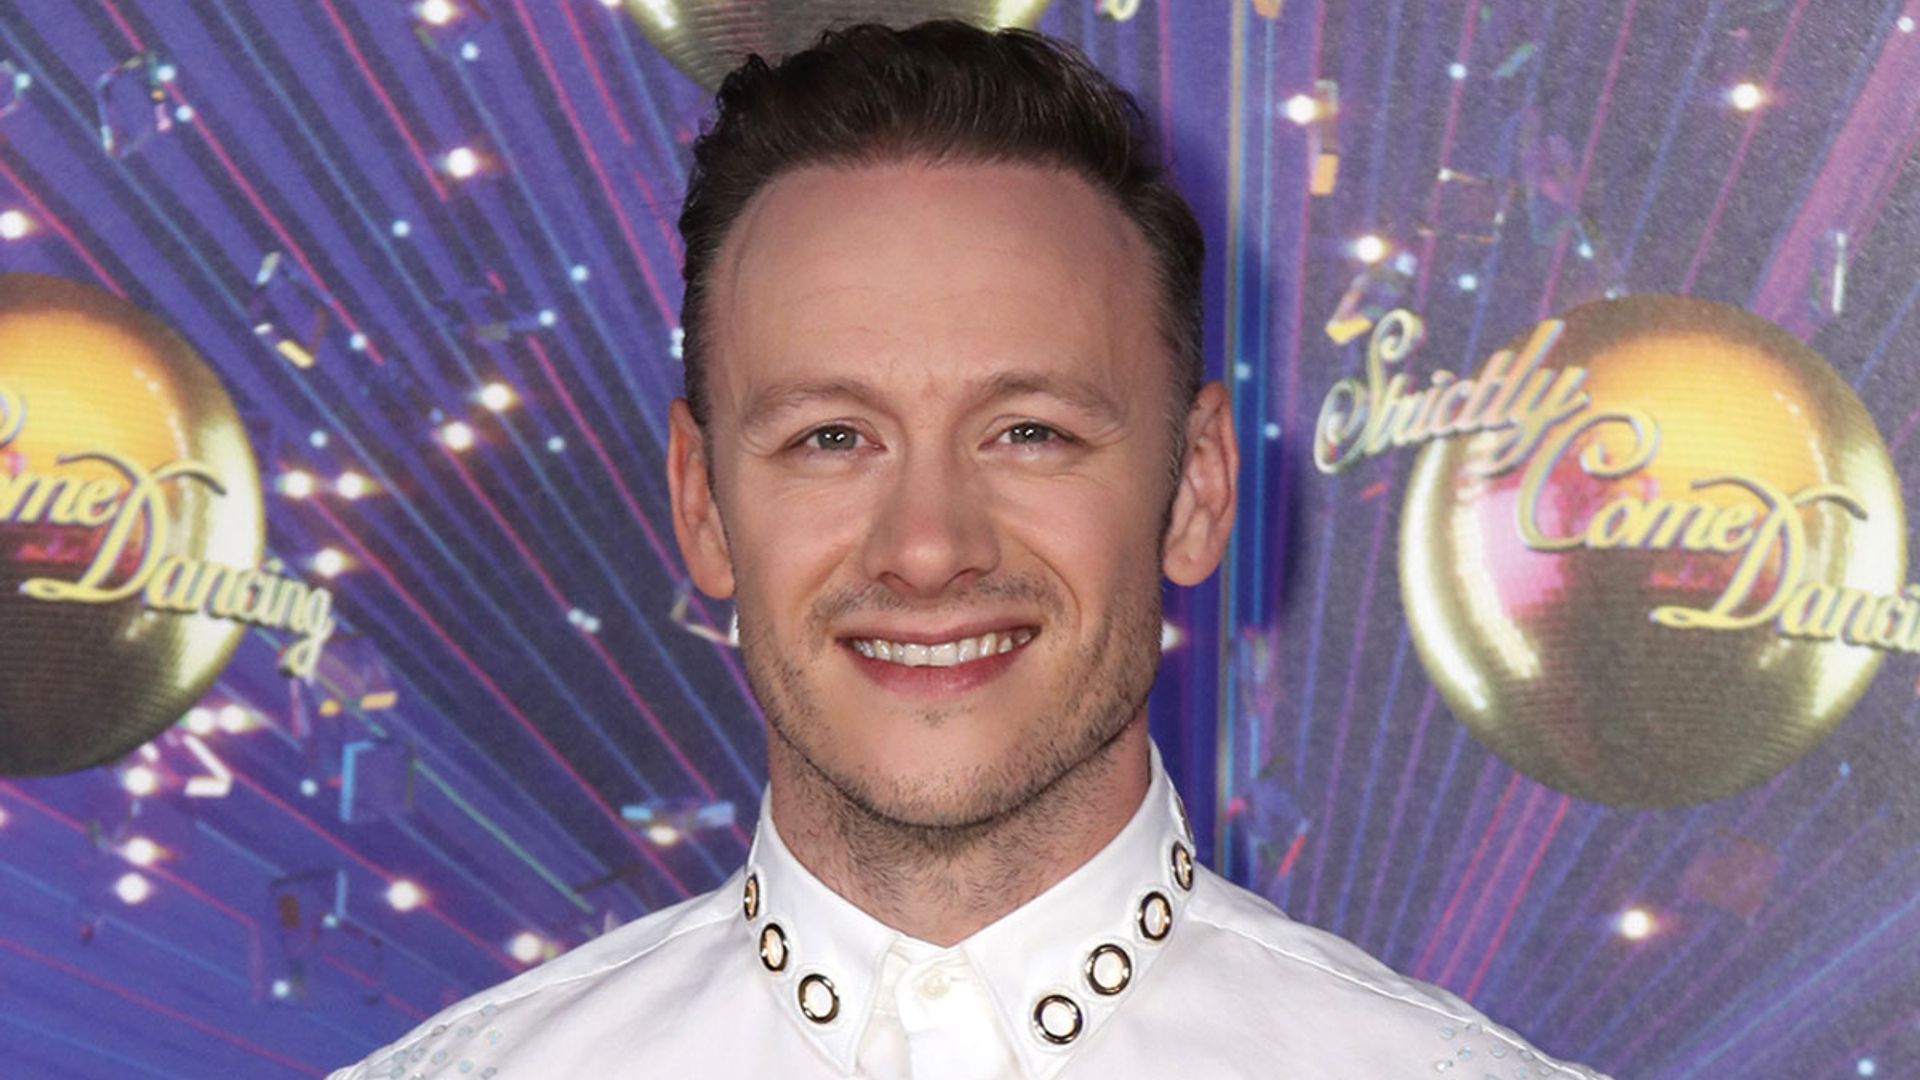 kevin clifton strictly launch